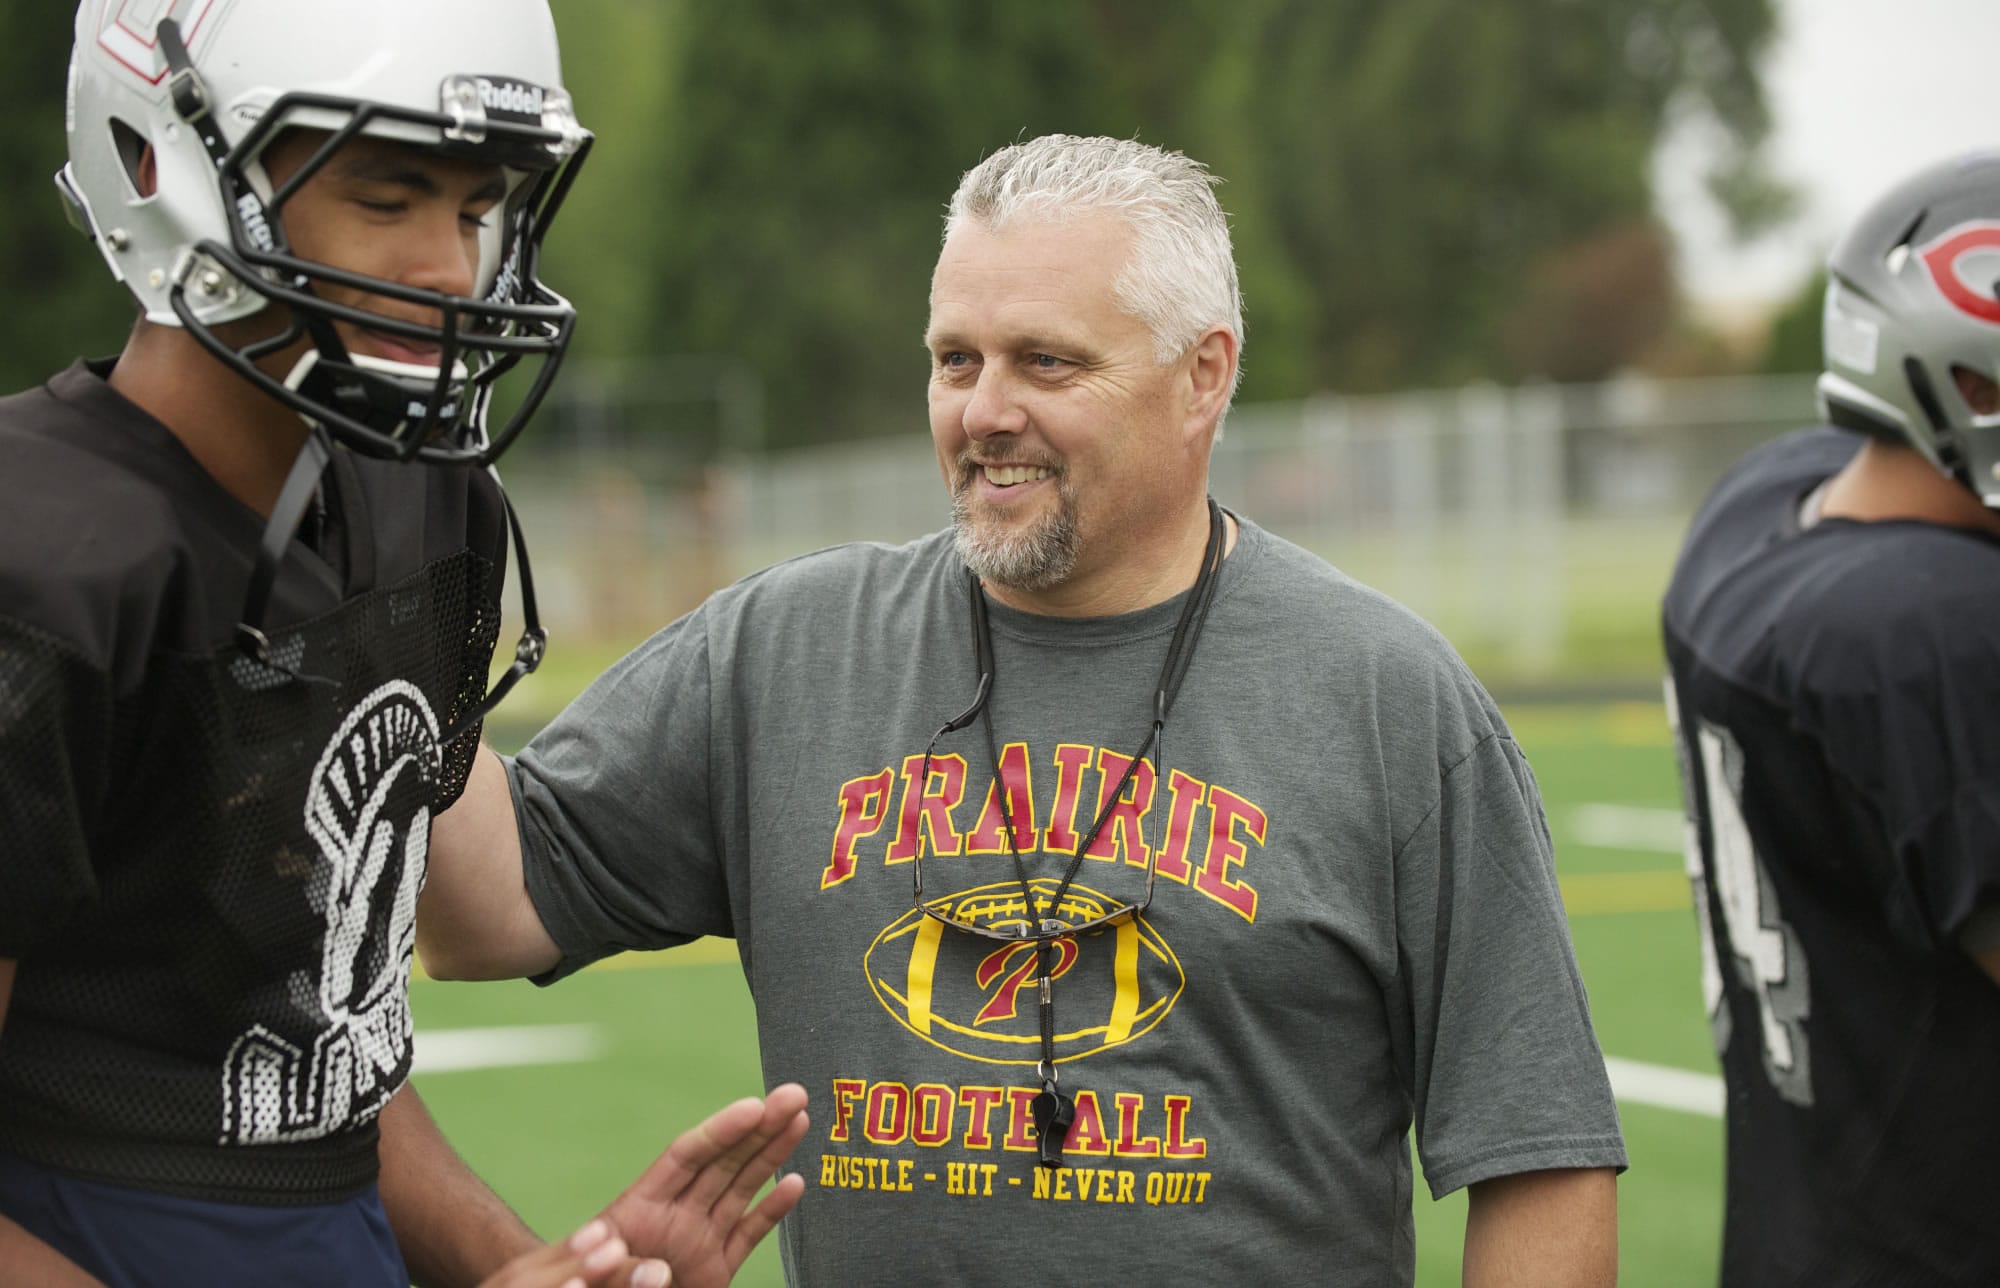 Prairie football coach Terry Hyde will guide one of the all-star teams in Saturday's Freedom Bowl Classic.